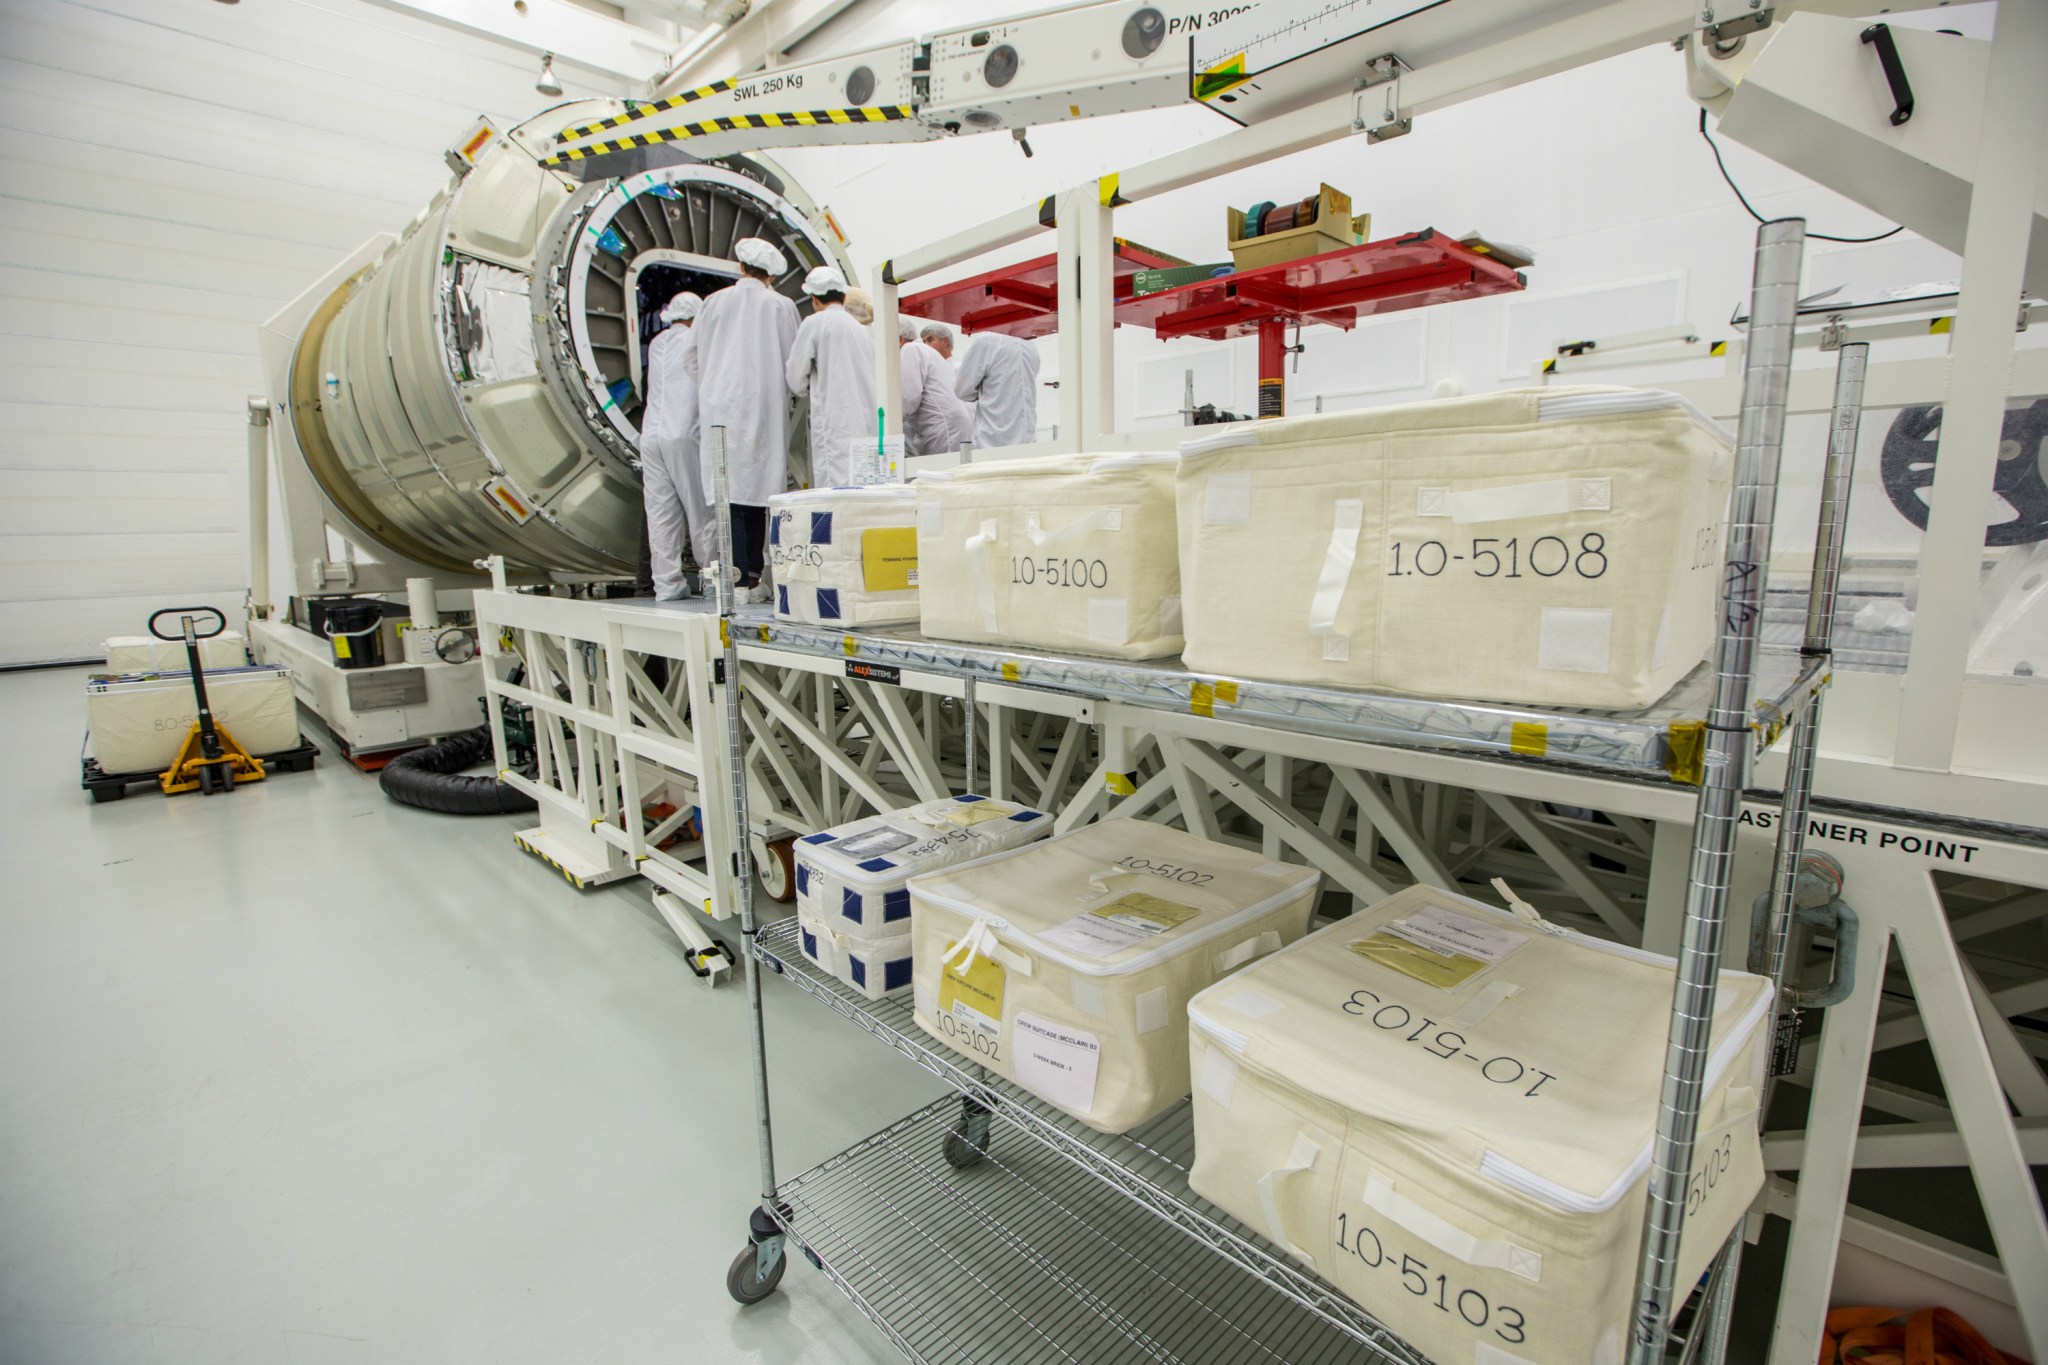 Northrop Grumman personnel load supplies and experiments into the Cygnus cargo spacecraft in the payload processing facility